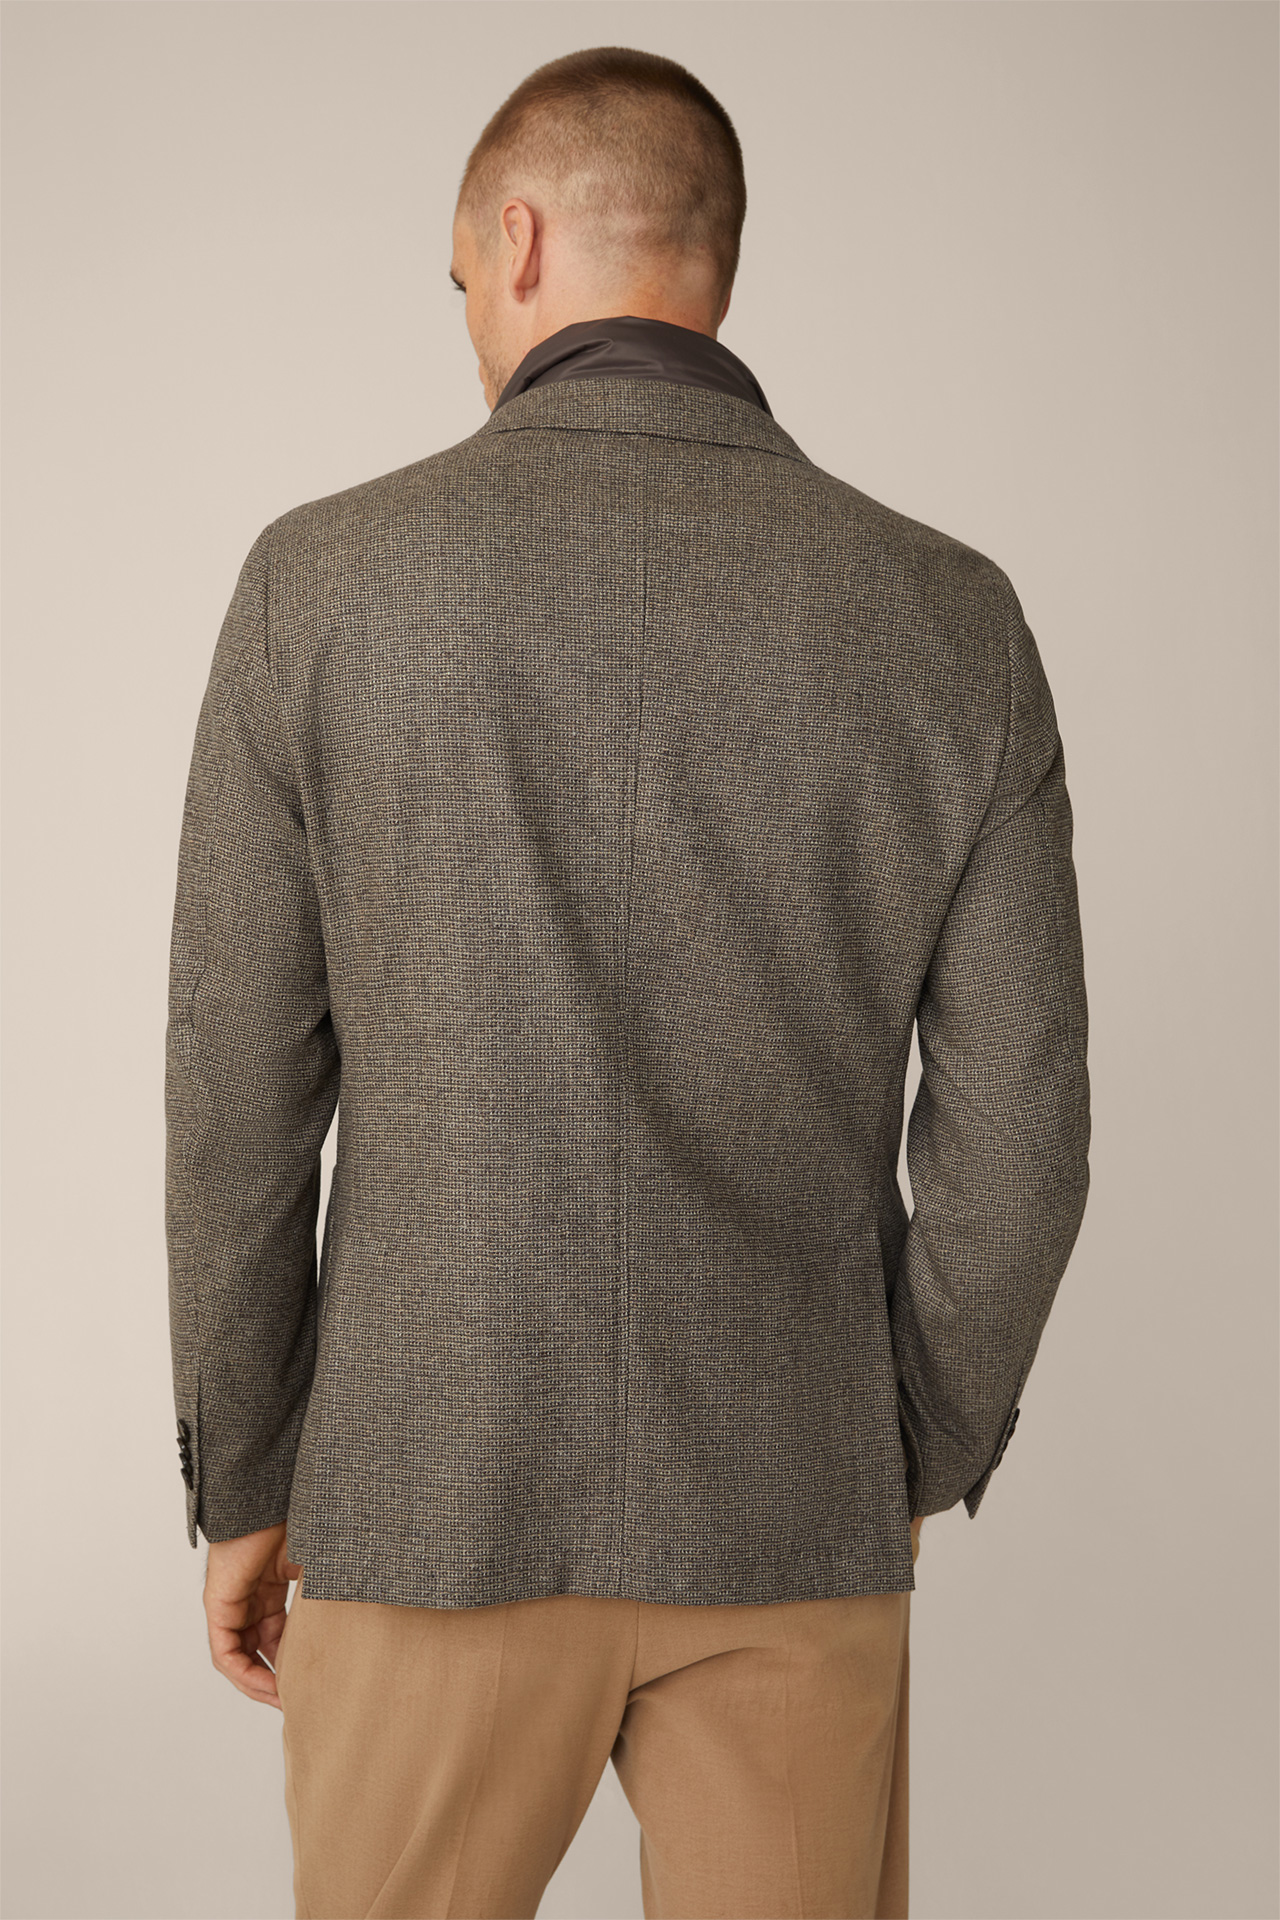 Trieste Wool Blend Jacket with Cashmere and Inlay in a Brown Pattern